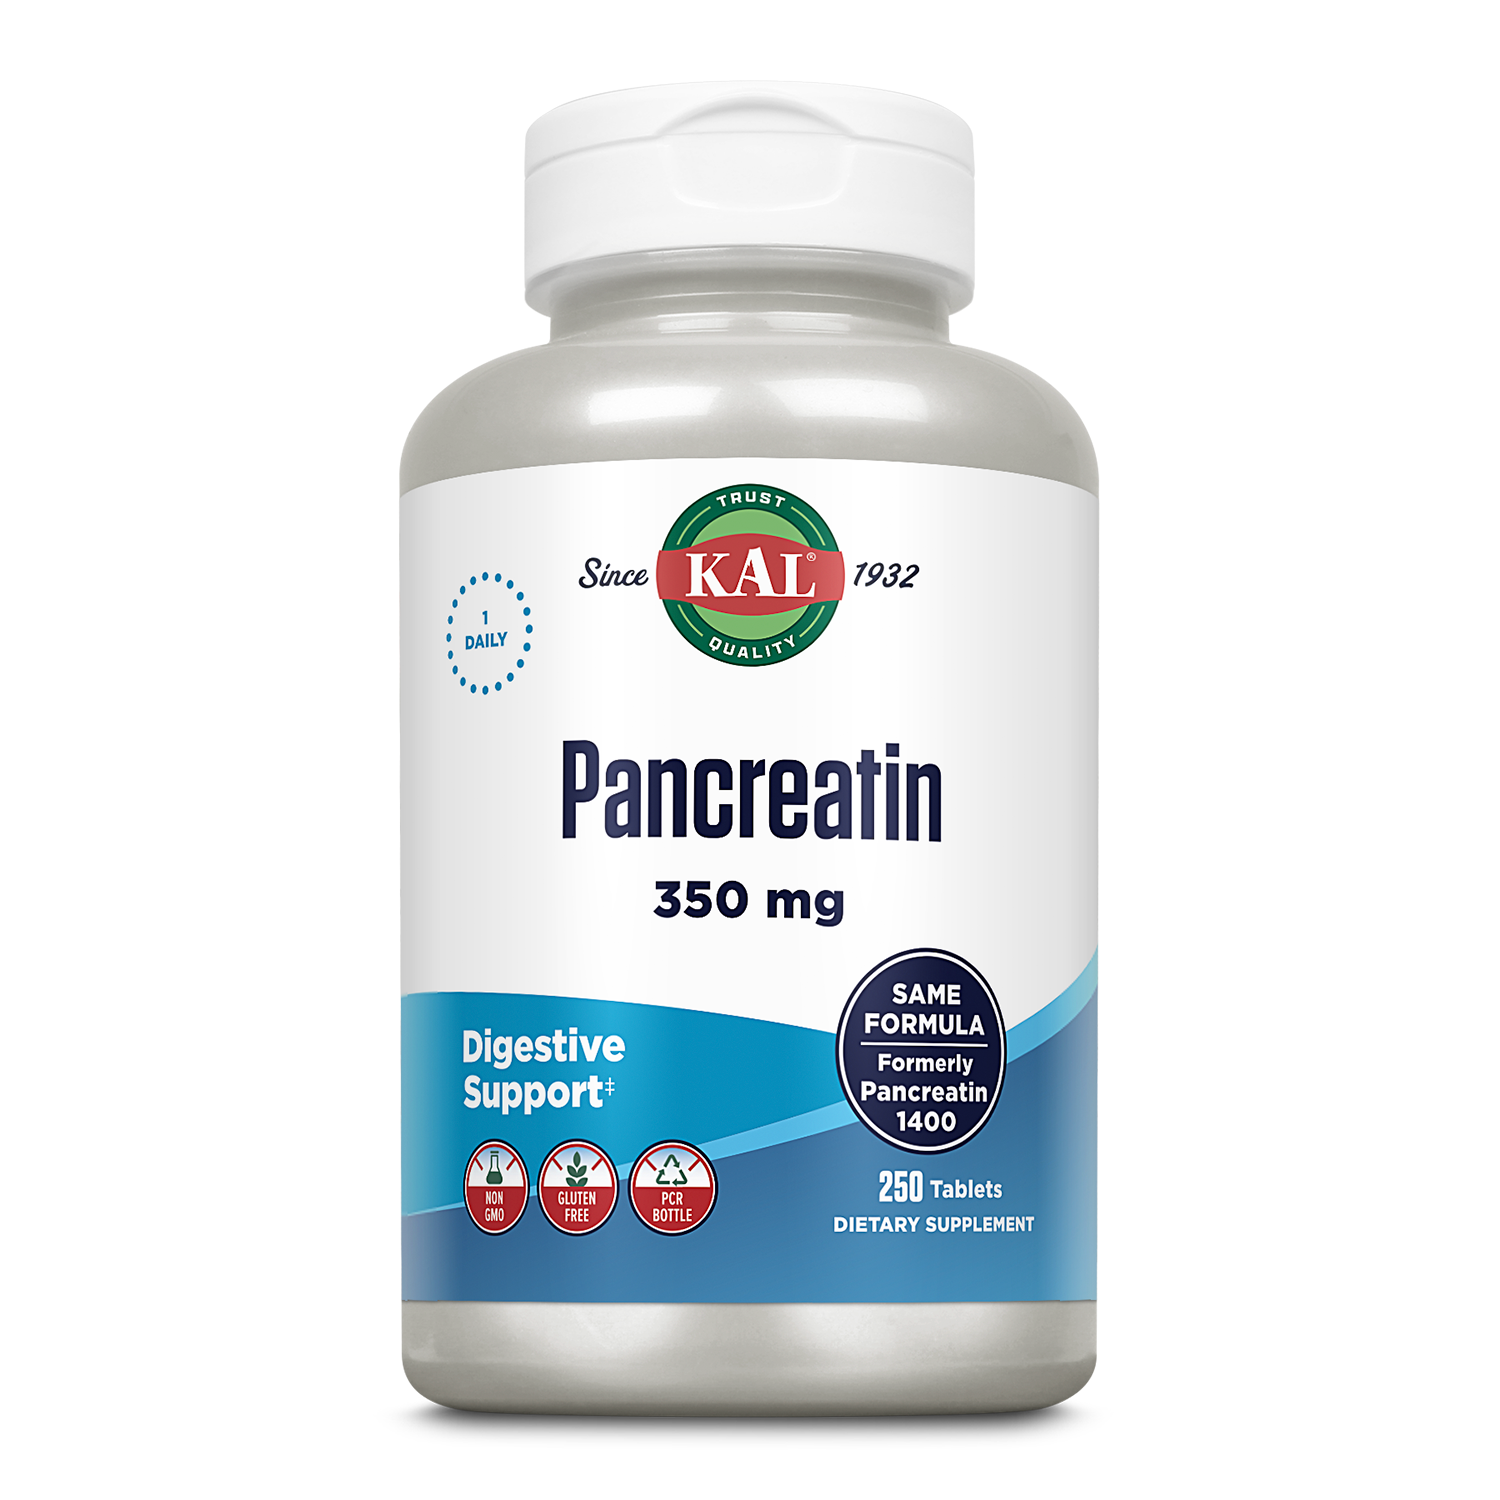 KAL Pancreatin 1400 | Pancreatic Enzymes Amylase, Protease & Lipase to Help Support Healthy Digestion of Carbs, Fats & Proteins | 250 Tablets - image 1 of 7